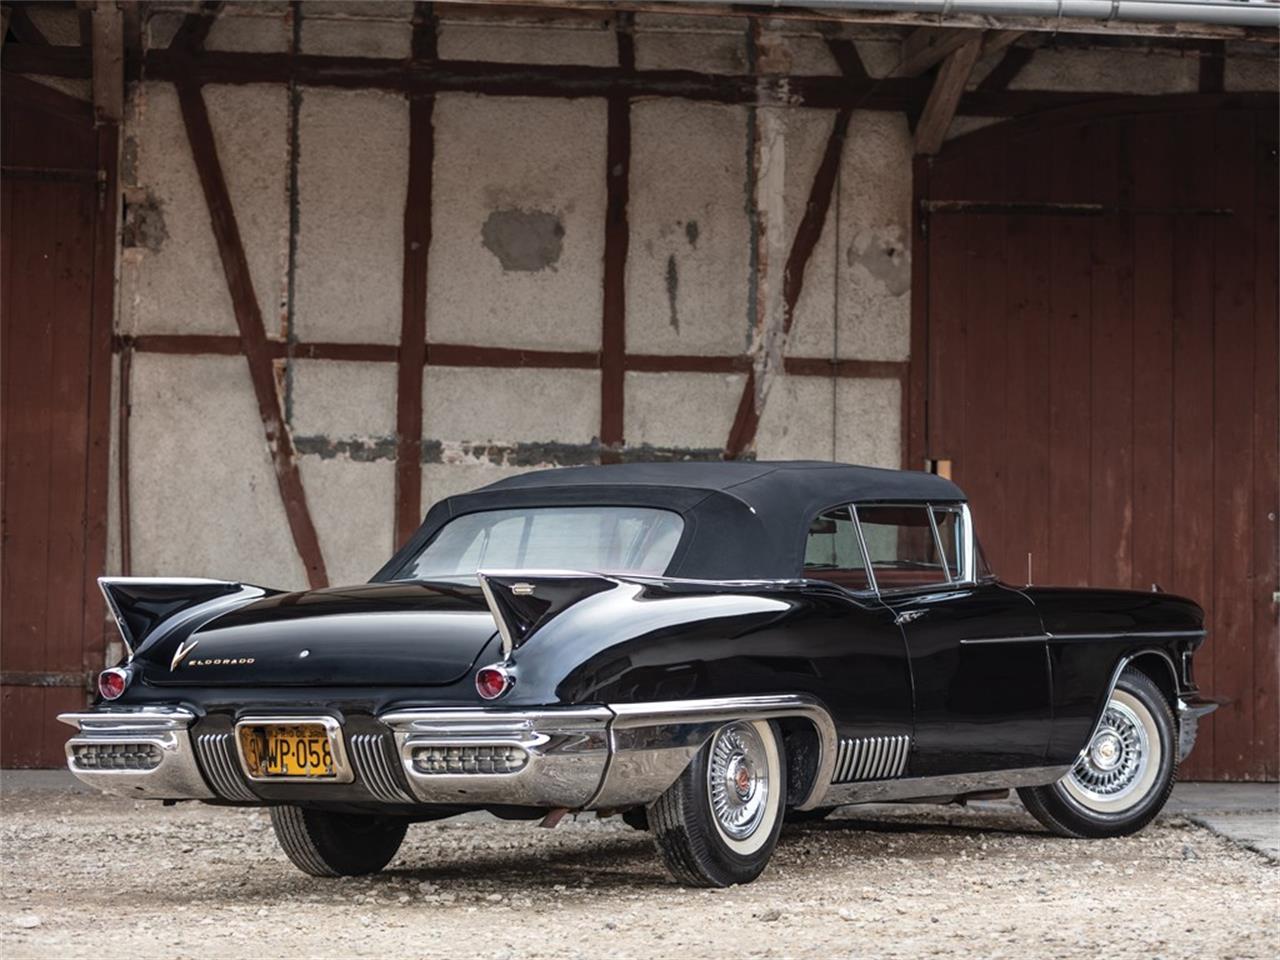 For Sale at Auction: 1958 Cadillac Eldorado Biarritz for sale in Cernobbio, Other